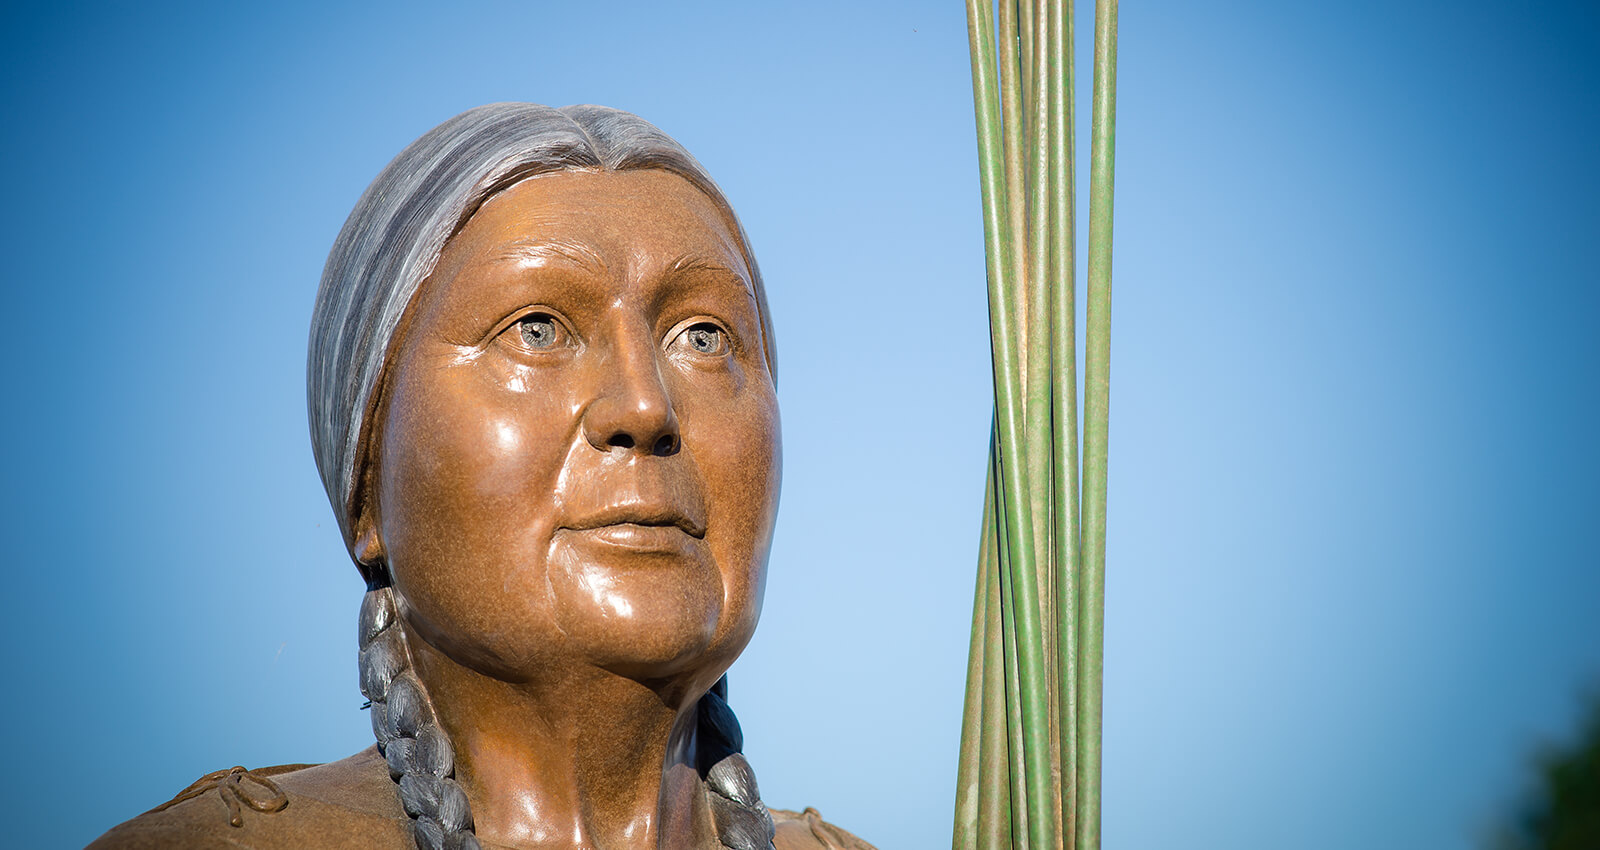 The face of The Gathering Place Elder Woman sculpture.